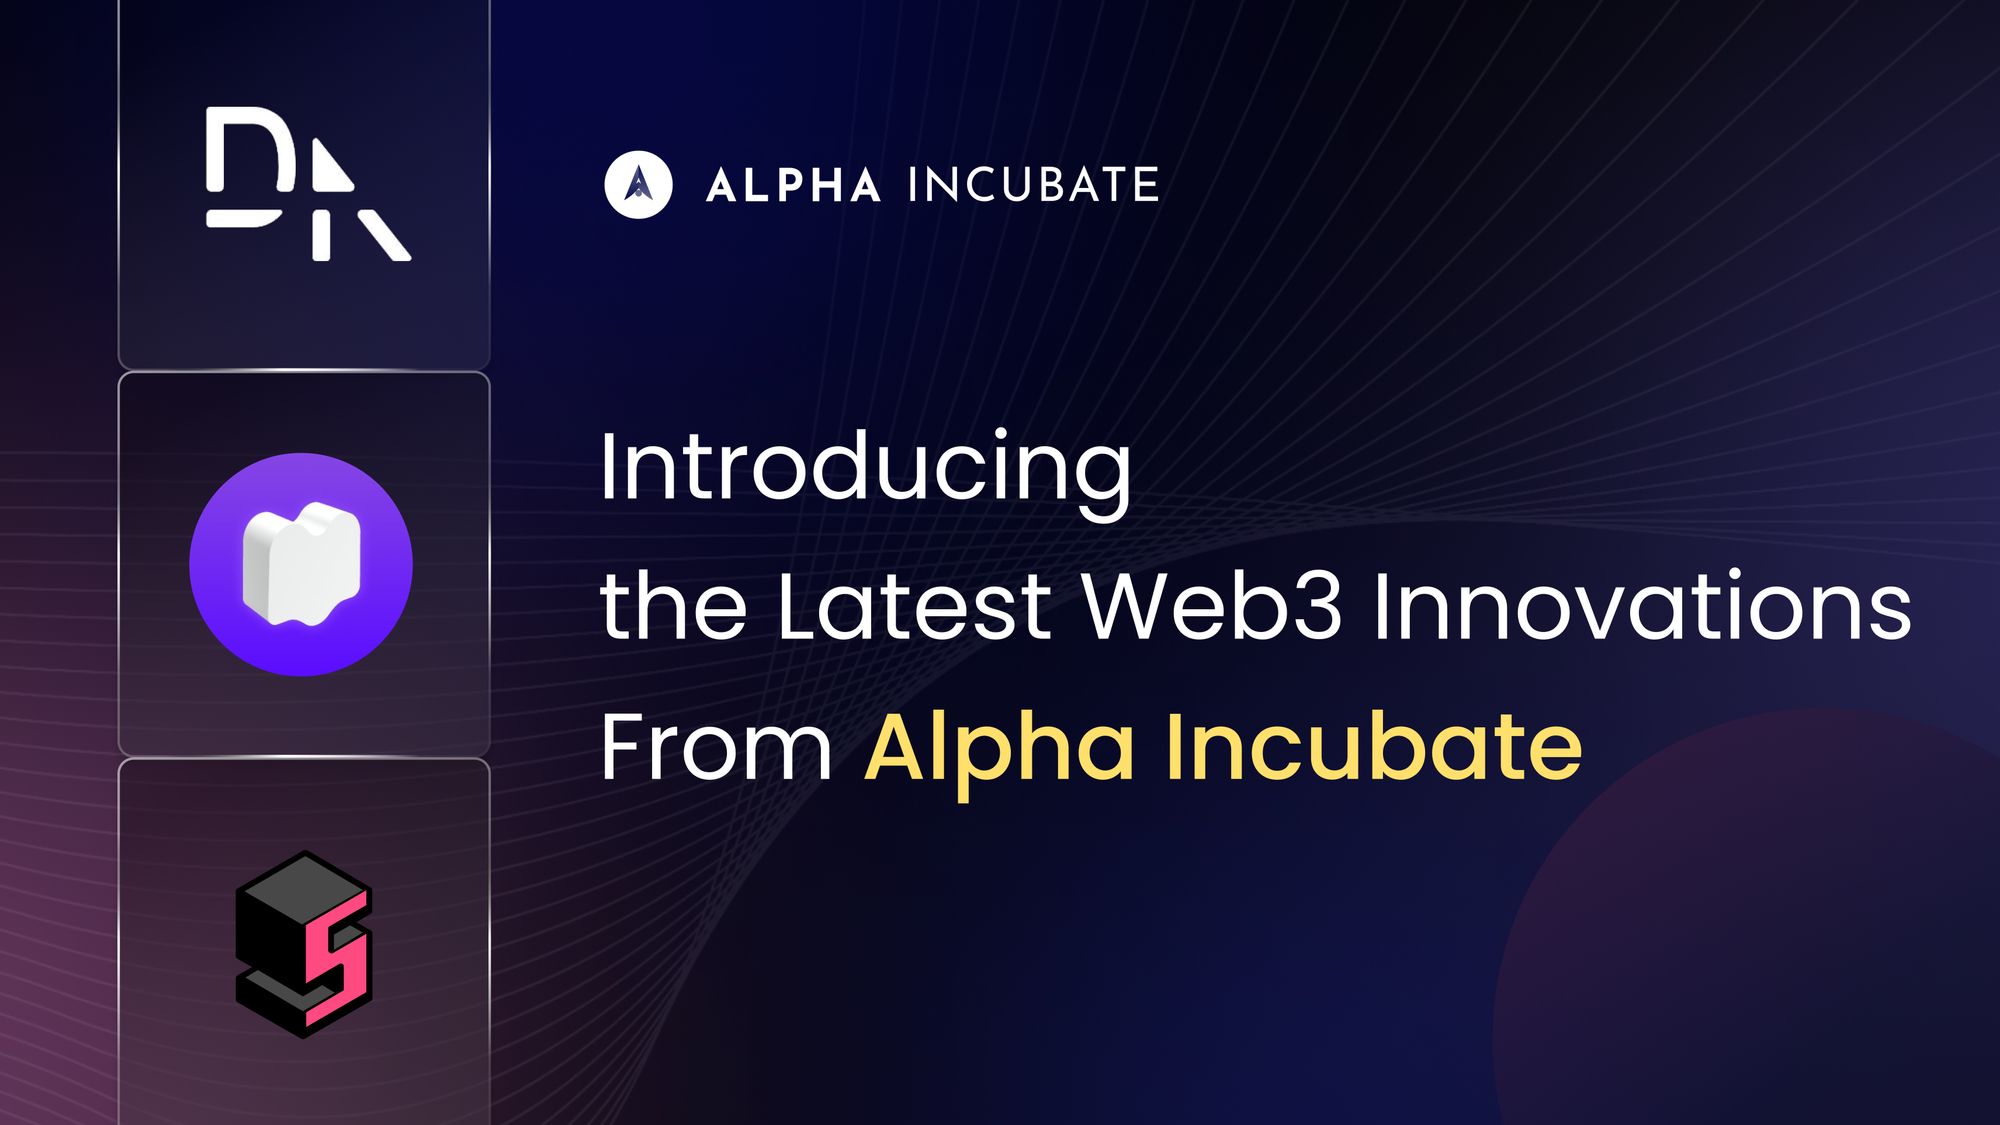 Introducing the Latest Web3 Innovations From Alpha Incubate